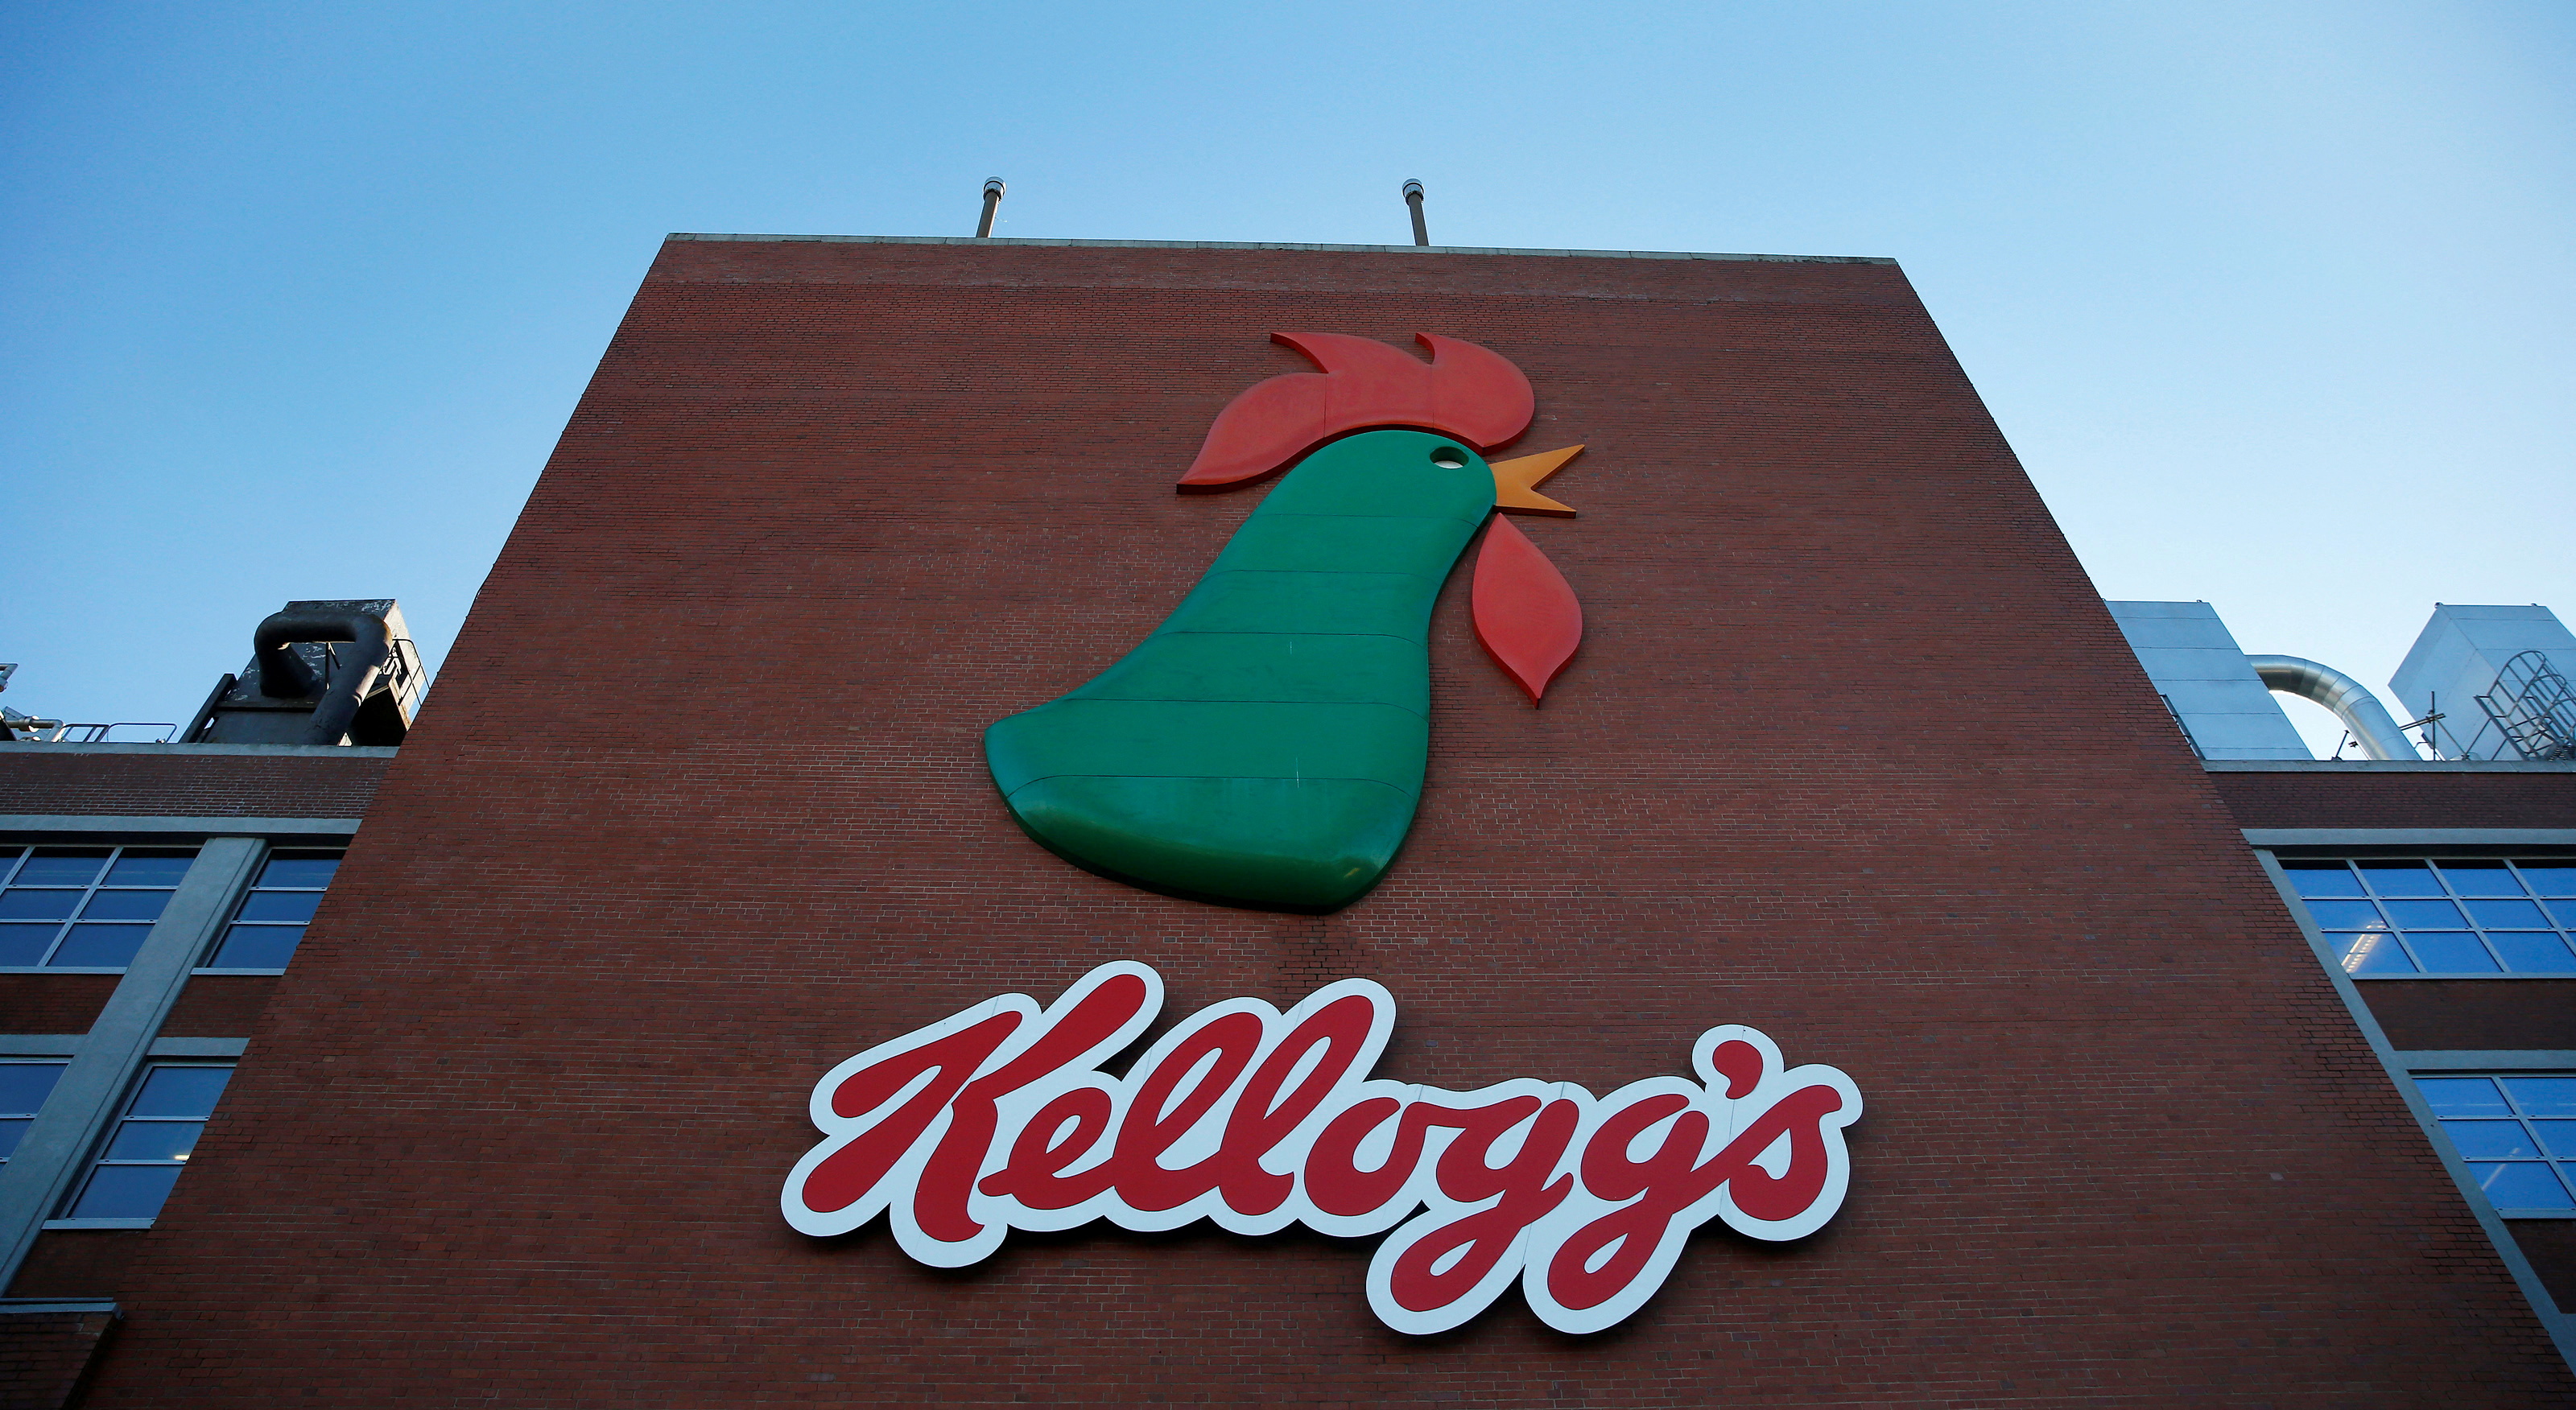 A sign hangs outside the Kellogg's factory near Manchester